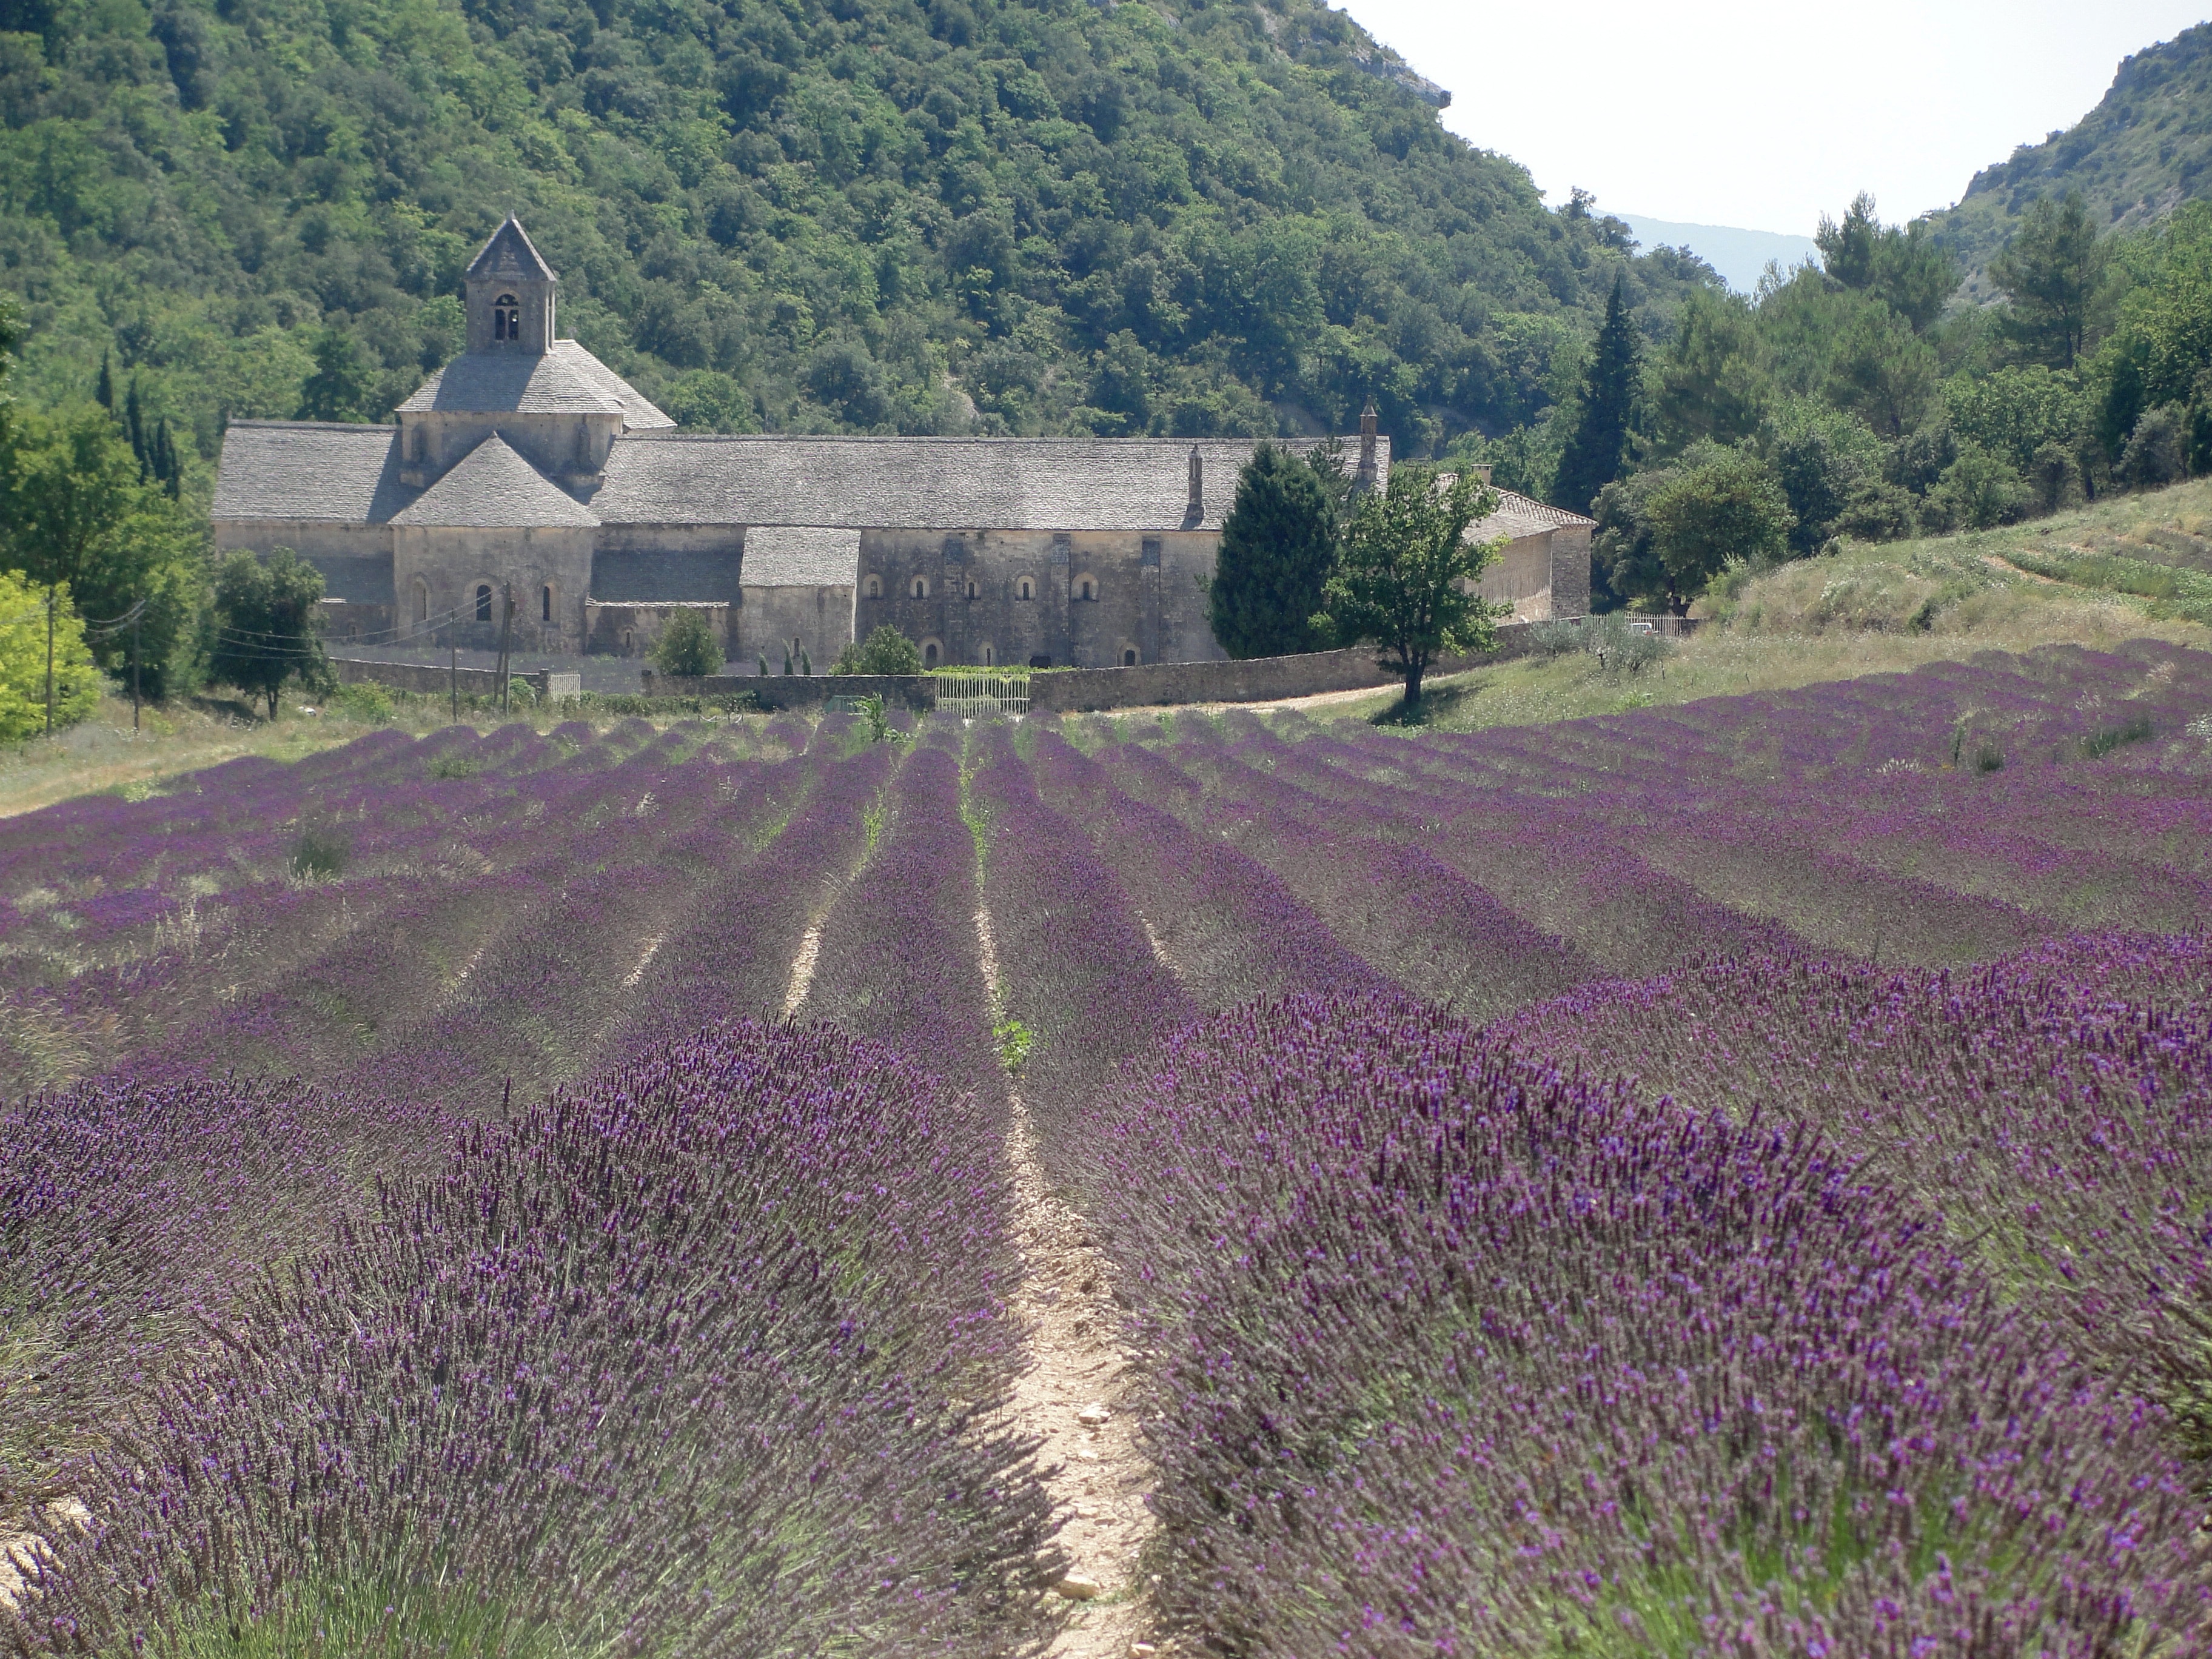 Field, South, Lavender, France, Holiday, rural scene, agriculture